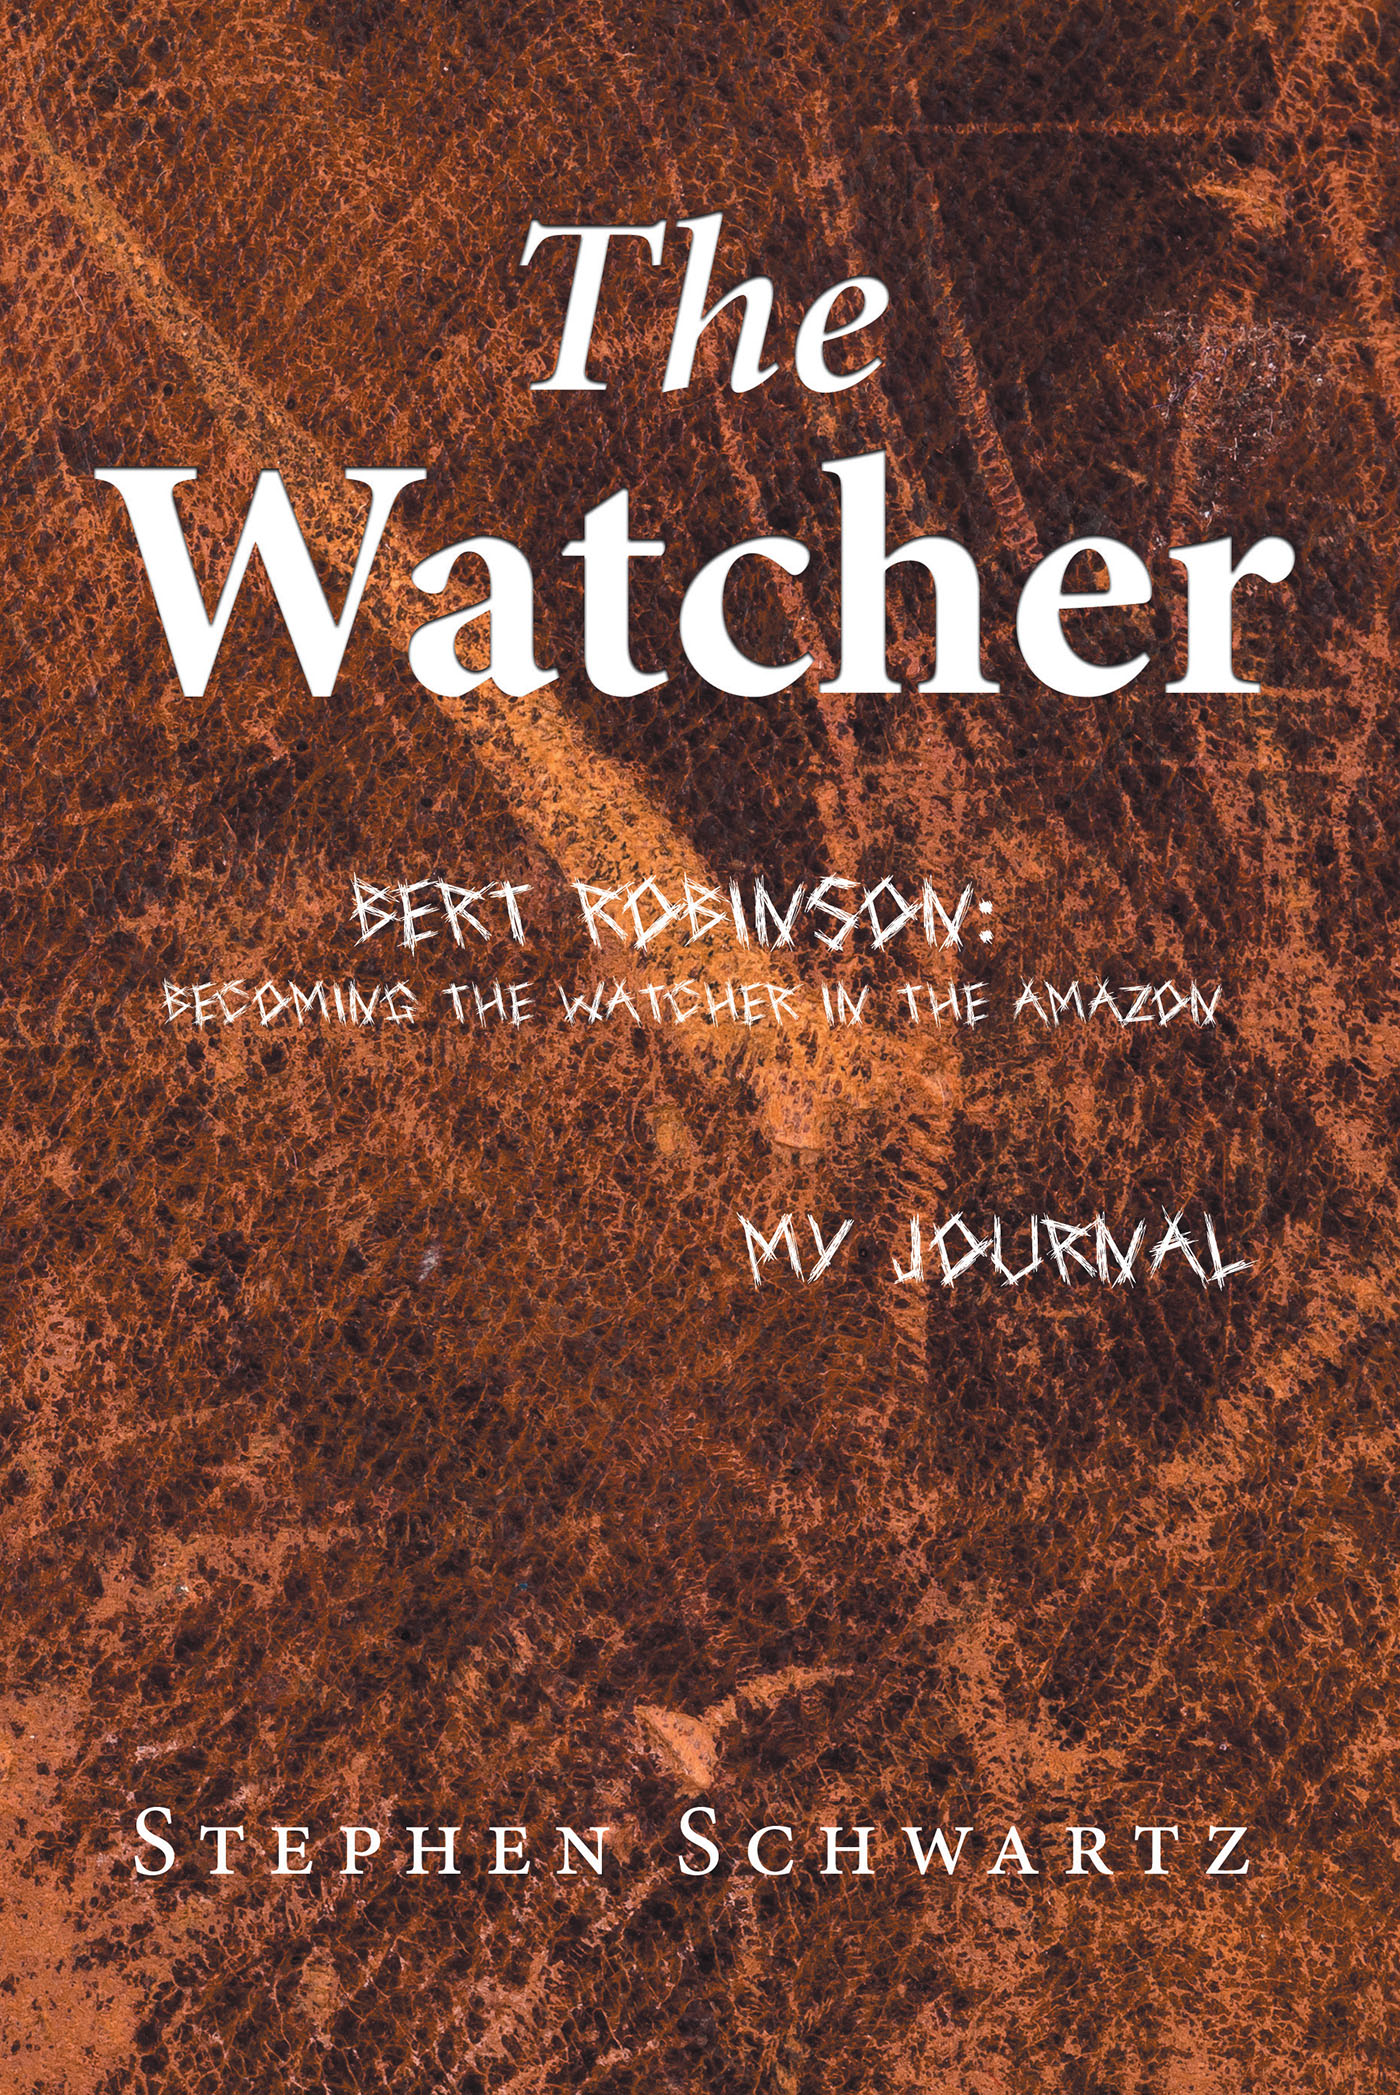 Stephen Schwartz’ New Book "The Watcher: Bert Robinson: Becoming the Watcher in the Amazon" is a Powerful Epic Inspired by the Author’s Passion for Wildlife Conservation